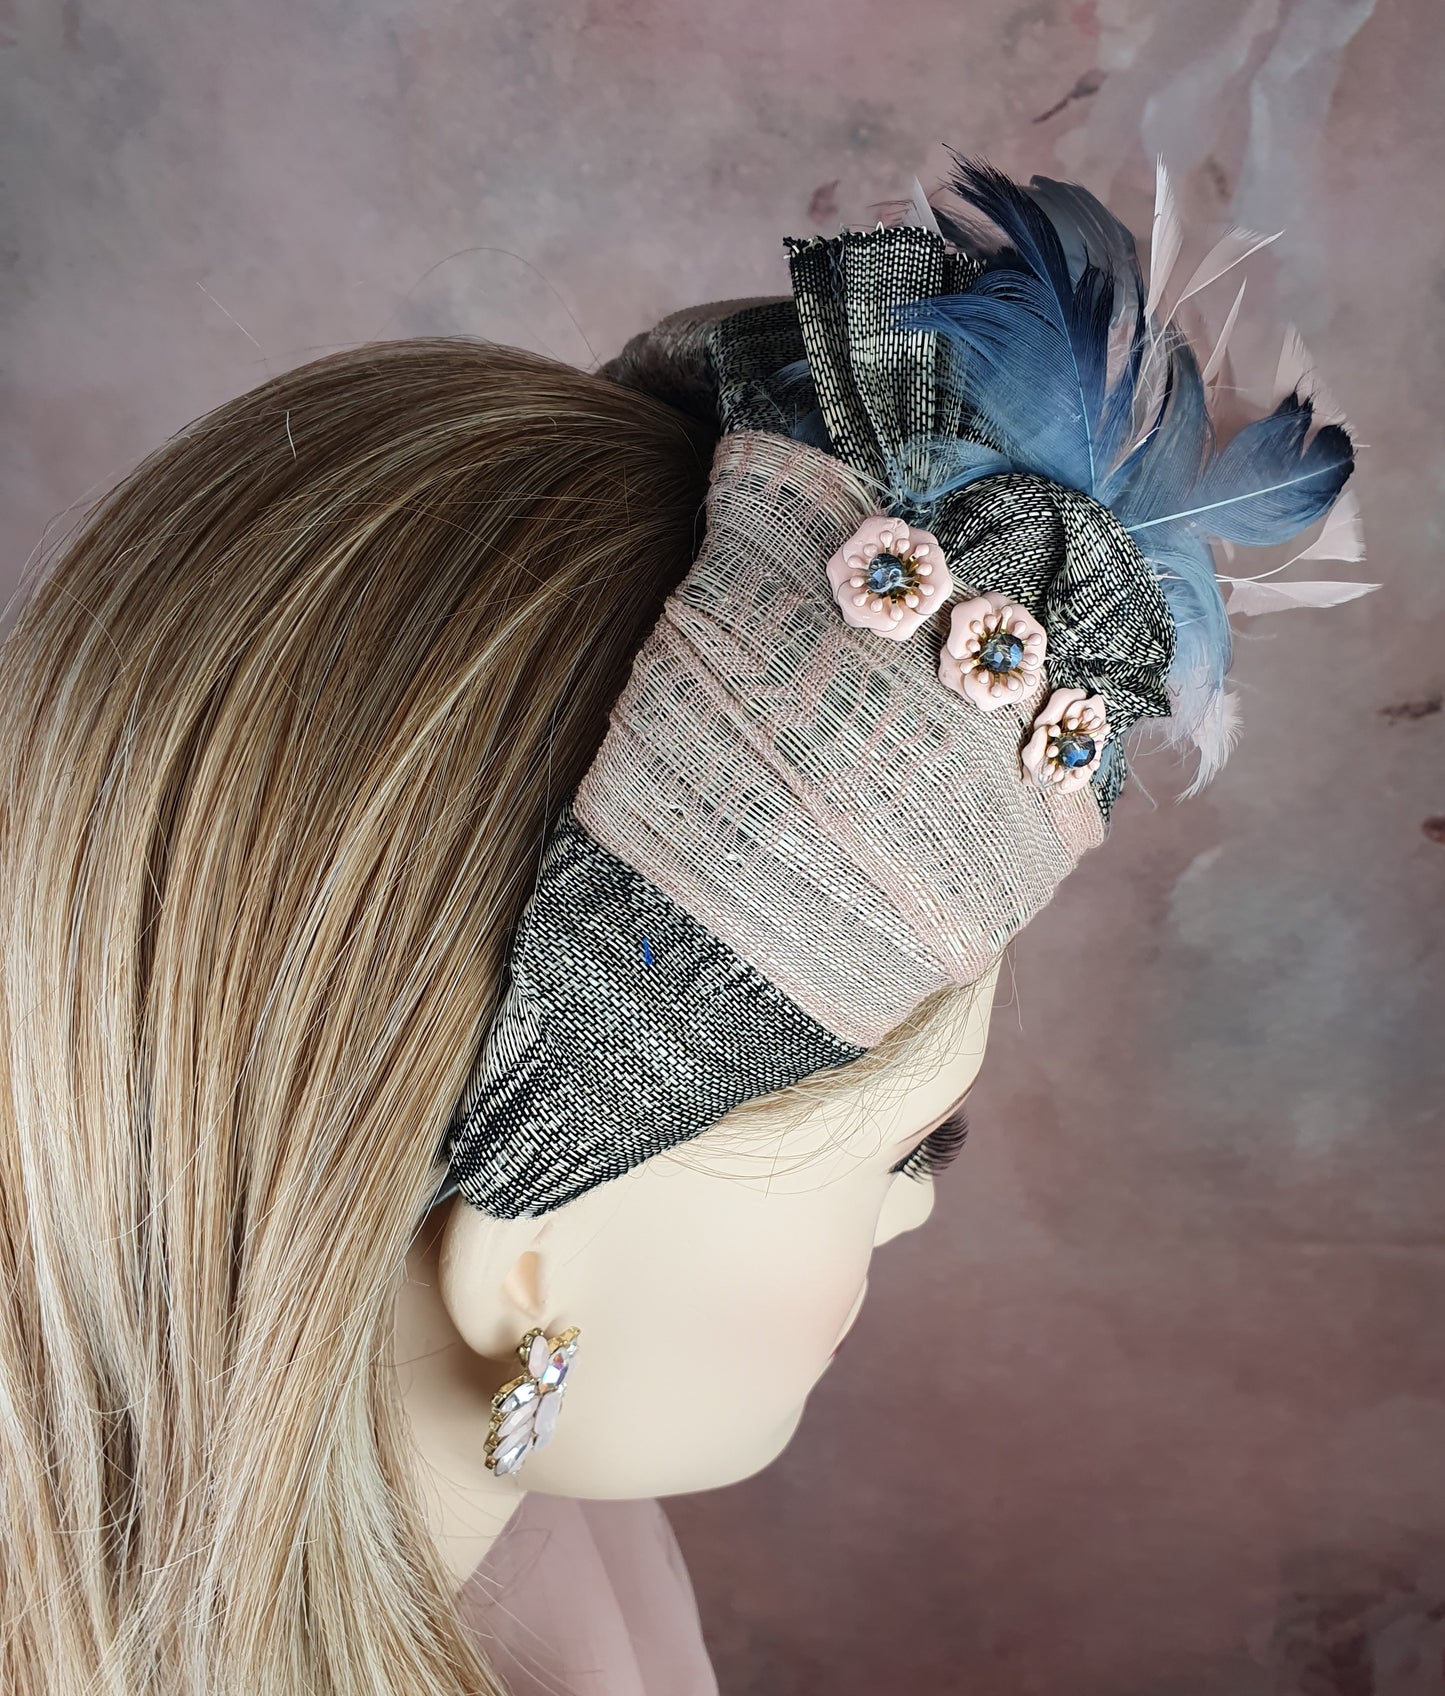 Handmade headband pink and gray made of silk abaca, decorated with swan feathers, beautiful tiara for a special event or occasion